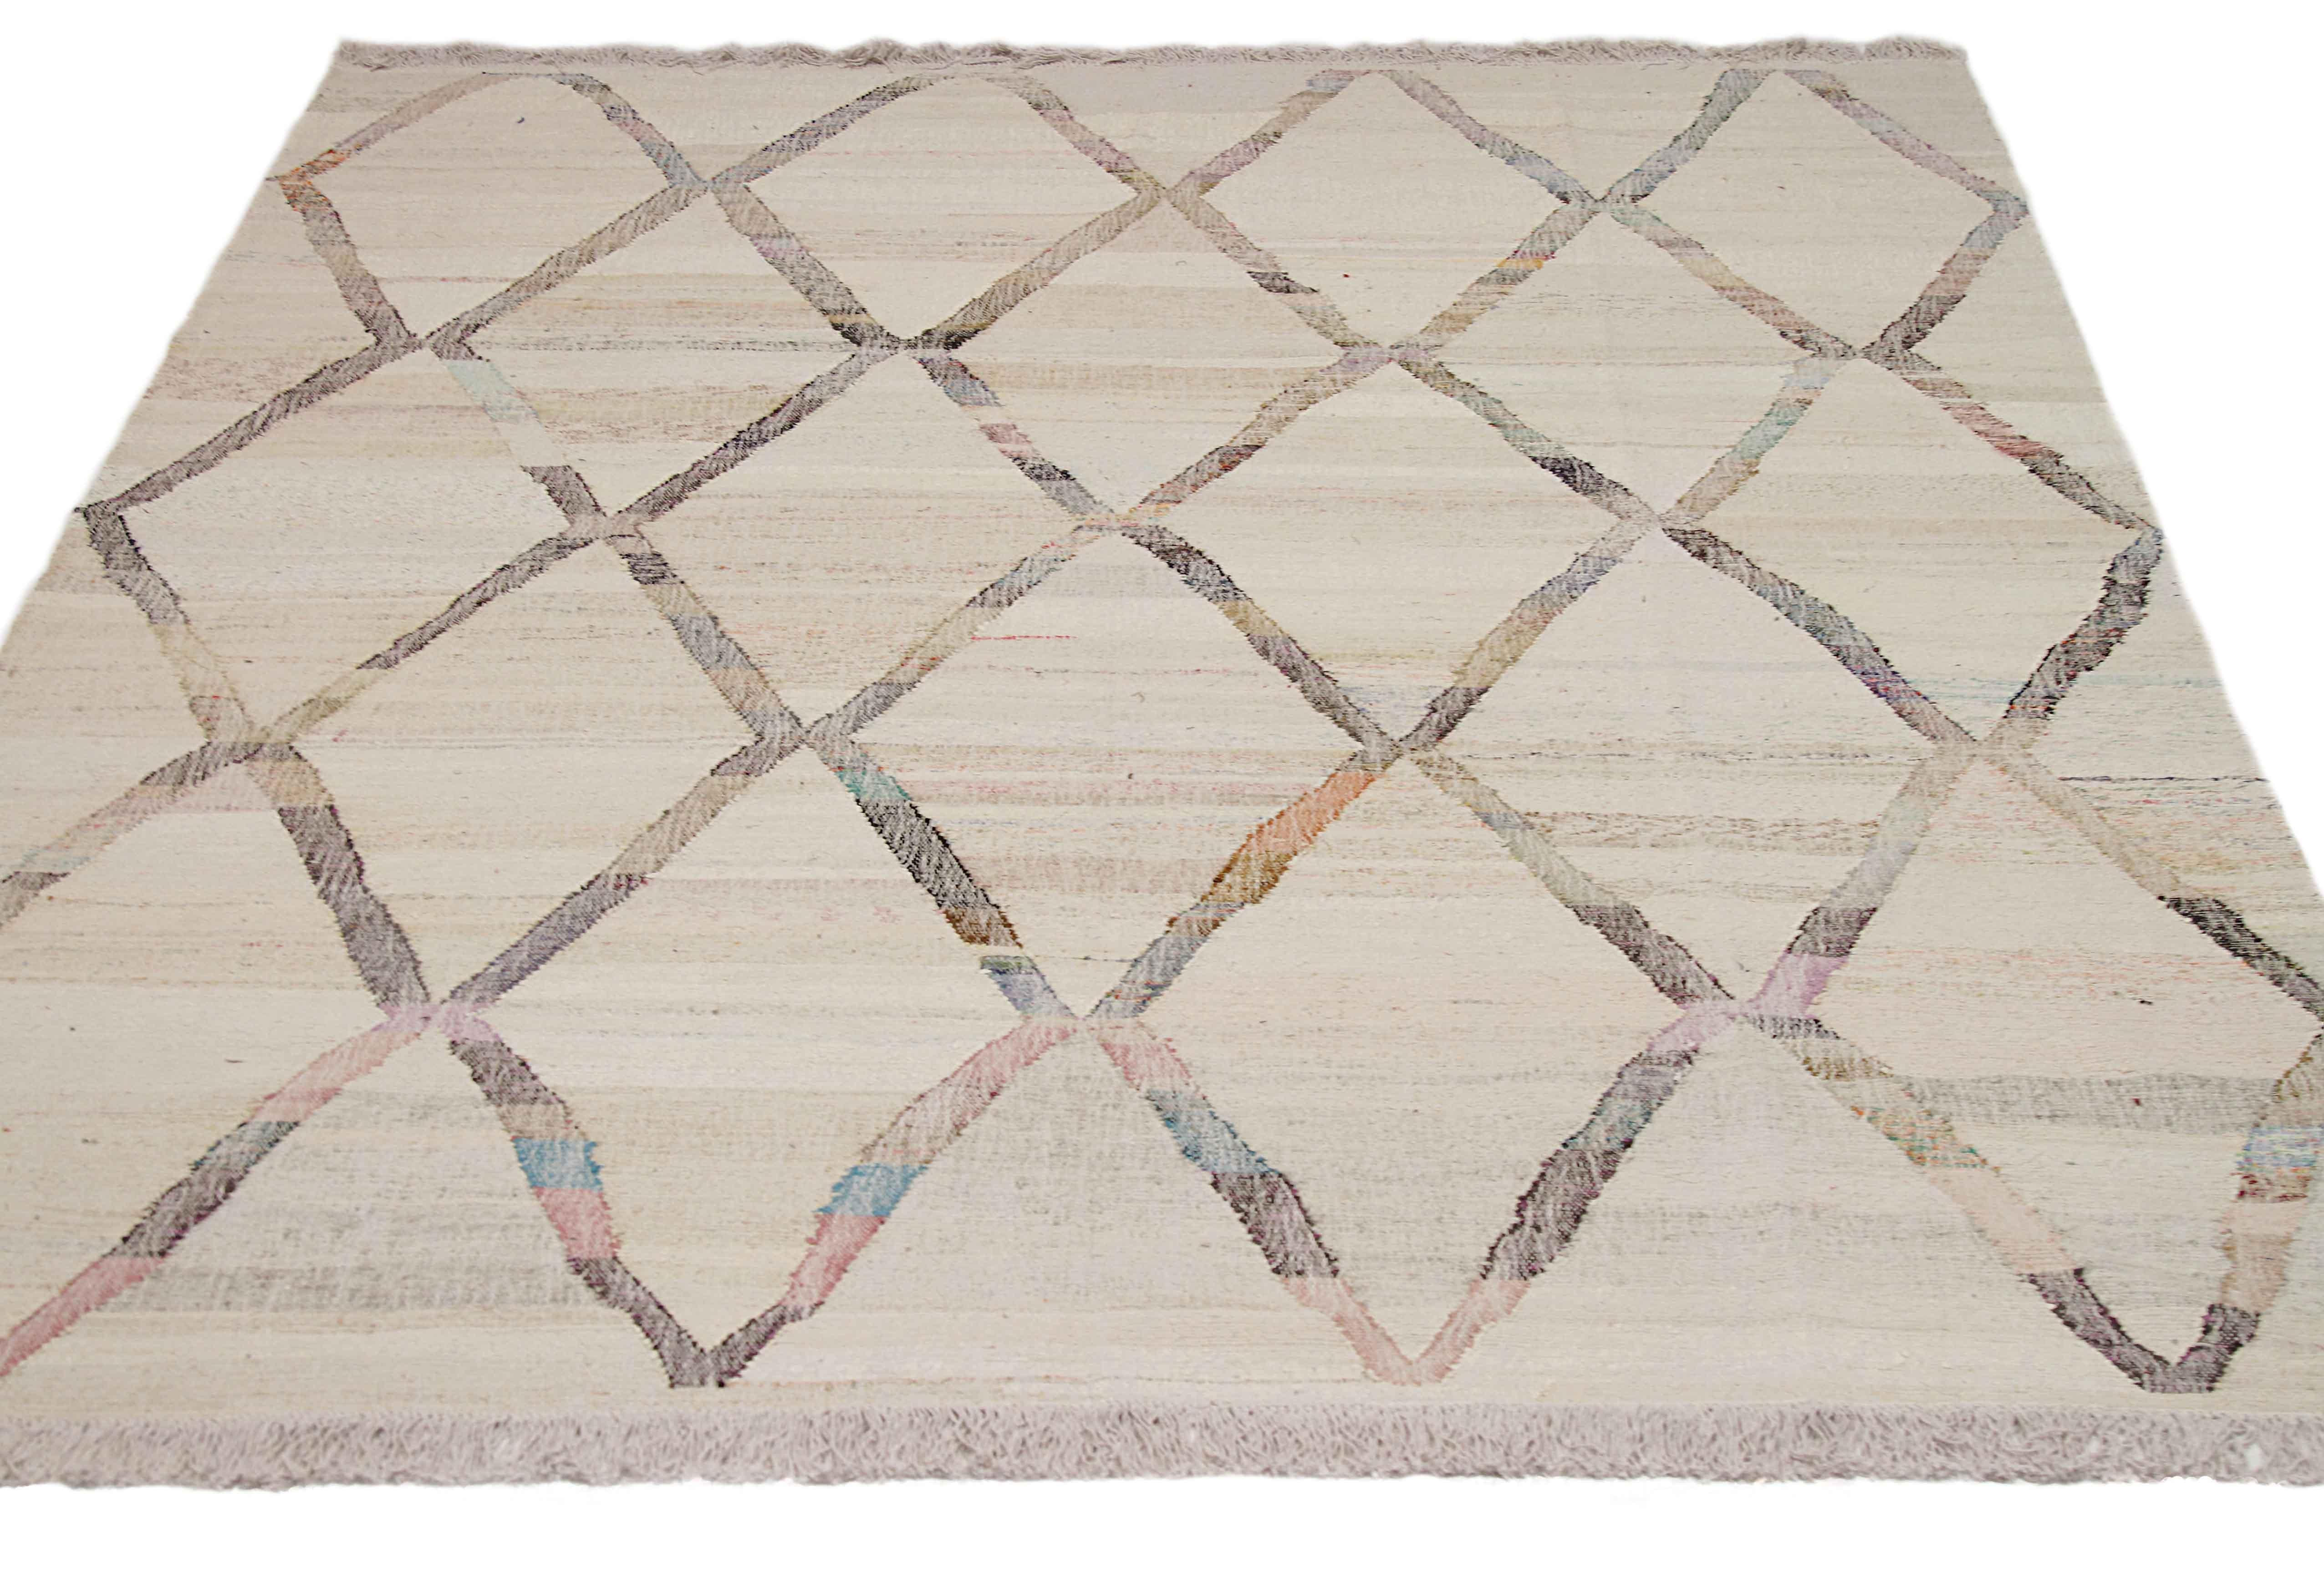 New Turkish rug handwoven from wool taken from antique fine carpets. It’s a traditional Kilim weaving featuring a diamond mesh pattern in vibrant colors over an ivory field. It’s a stunning piece to get for contemporary and modern spaces. It has a